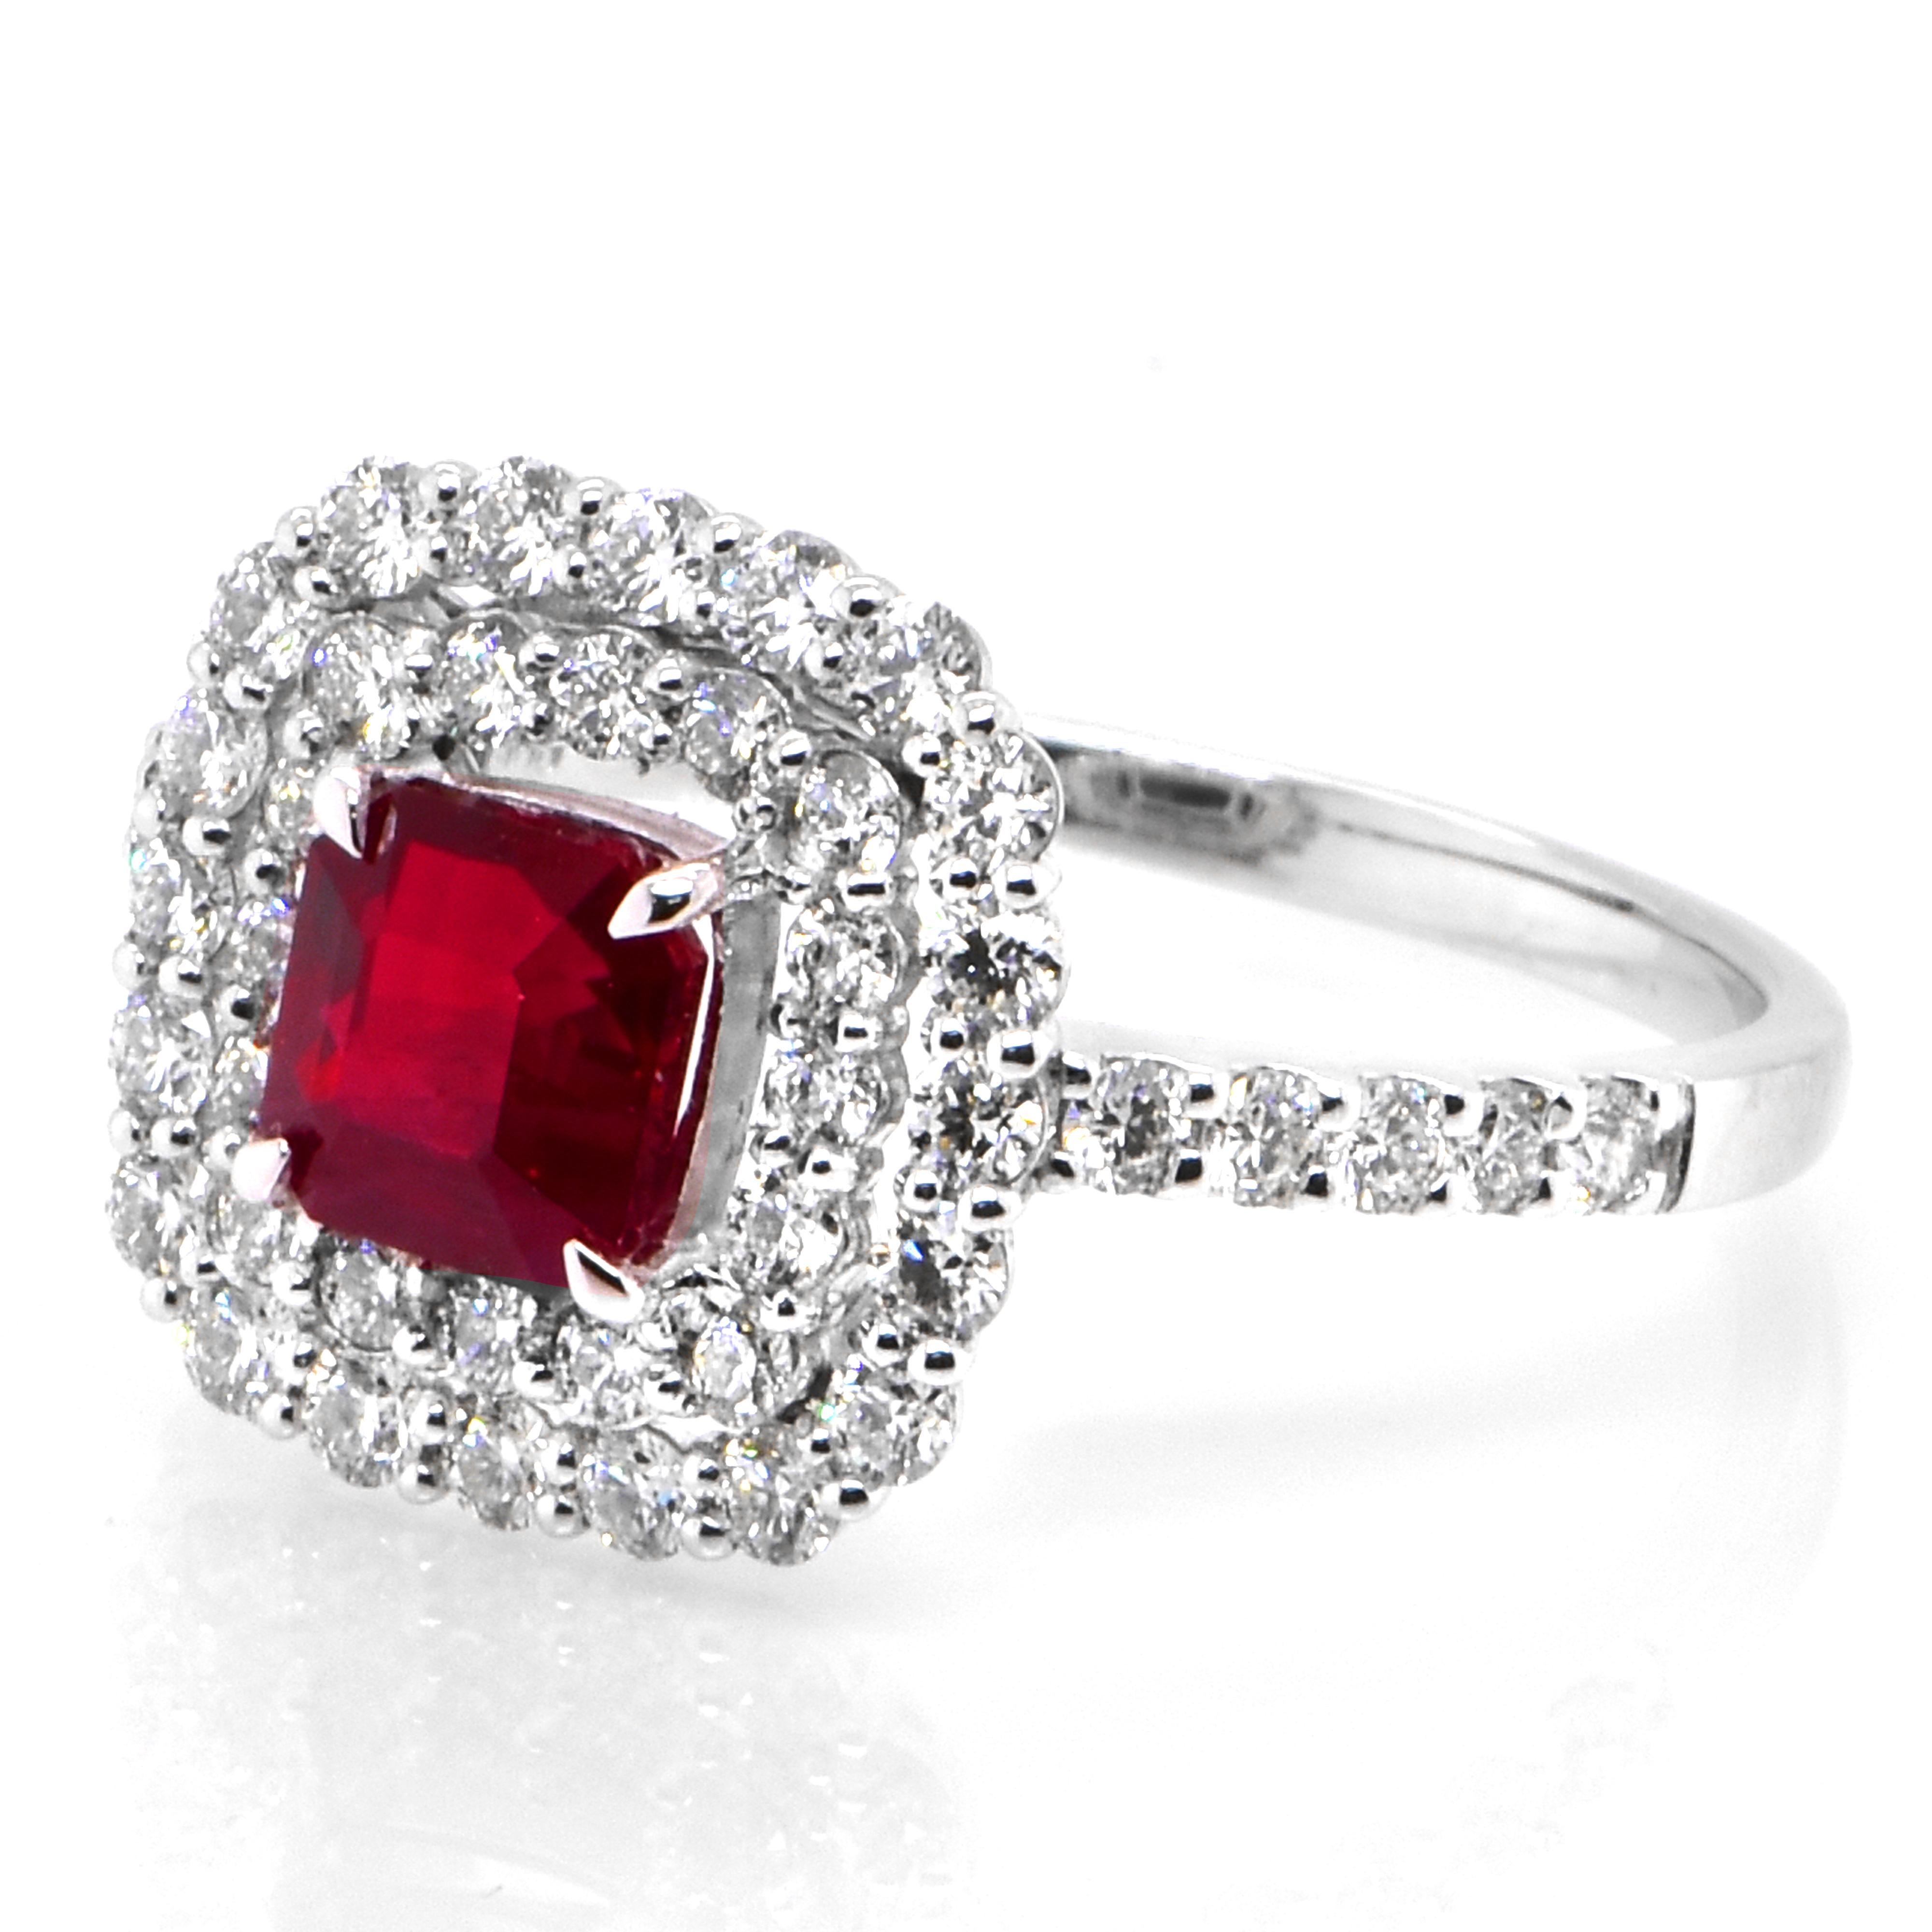 A beautiful Ring set in Platinum featuring a GIA Certified 1.01 Carat Natural, Pigeons Blood Red, Burmese Ruby and 0.67 Carat Diamonds. Rubies are referred to as 